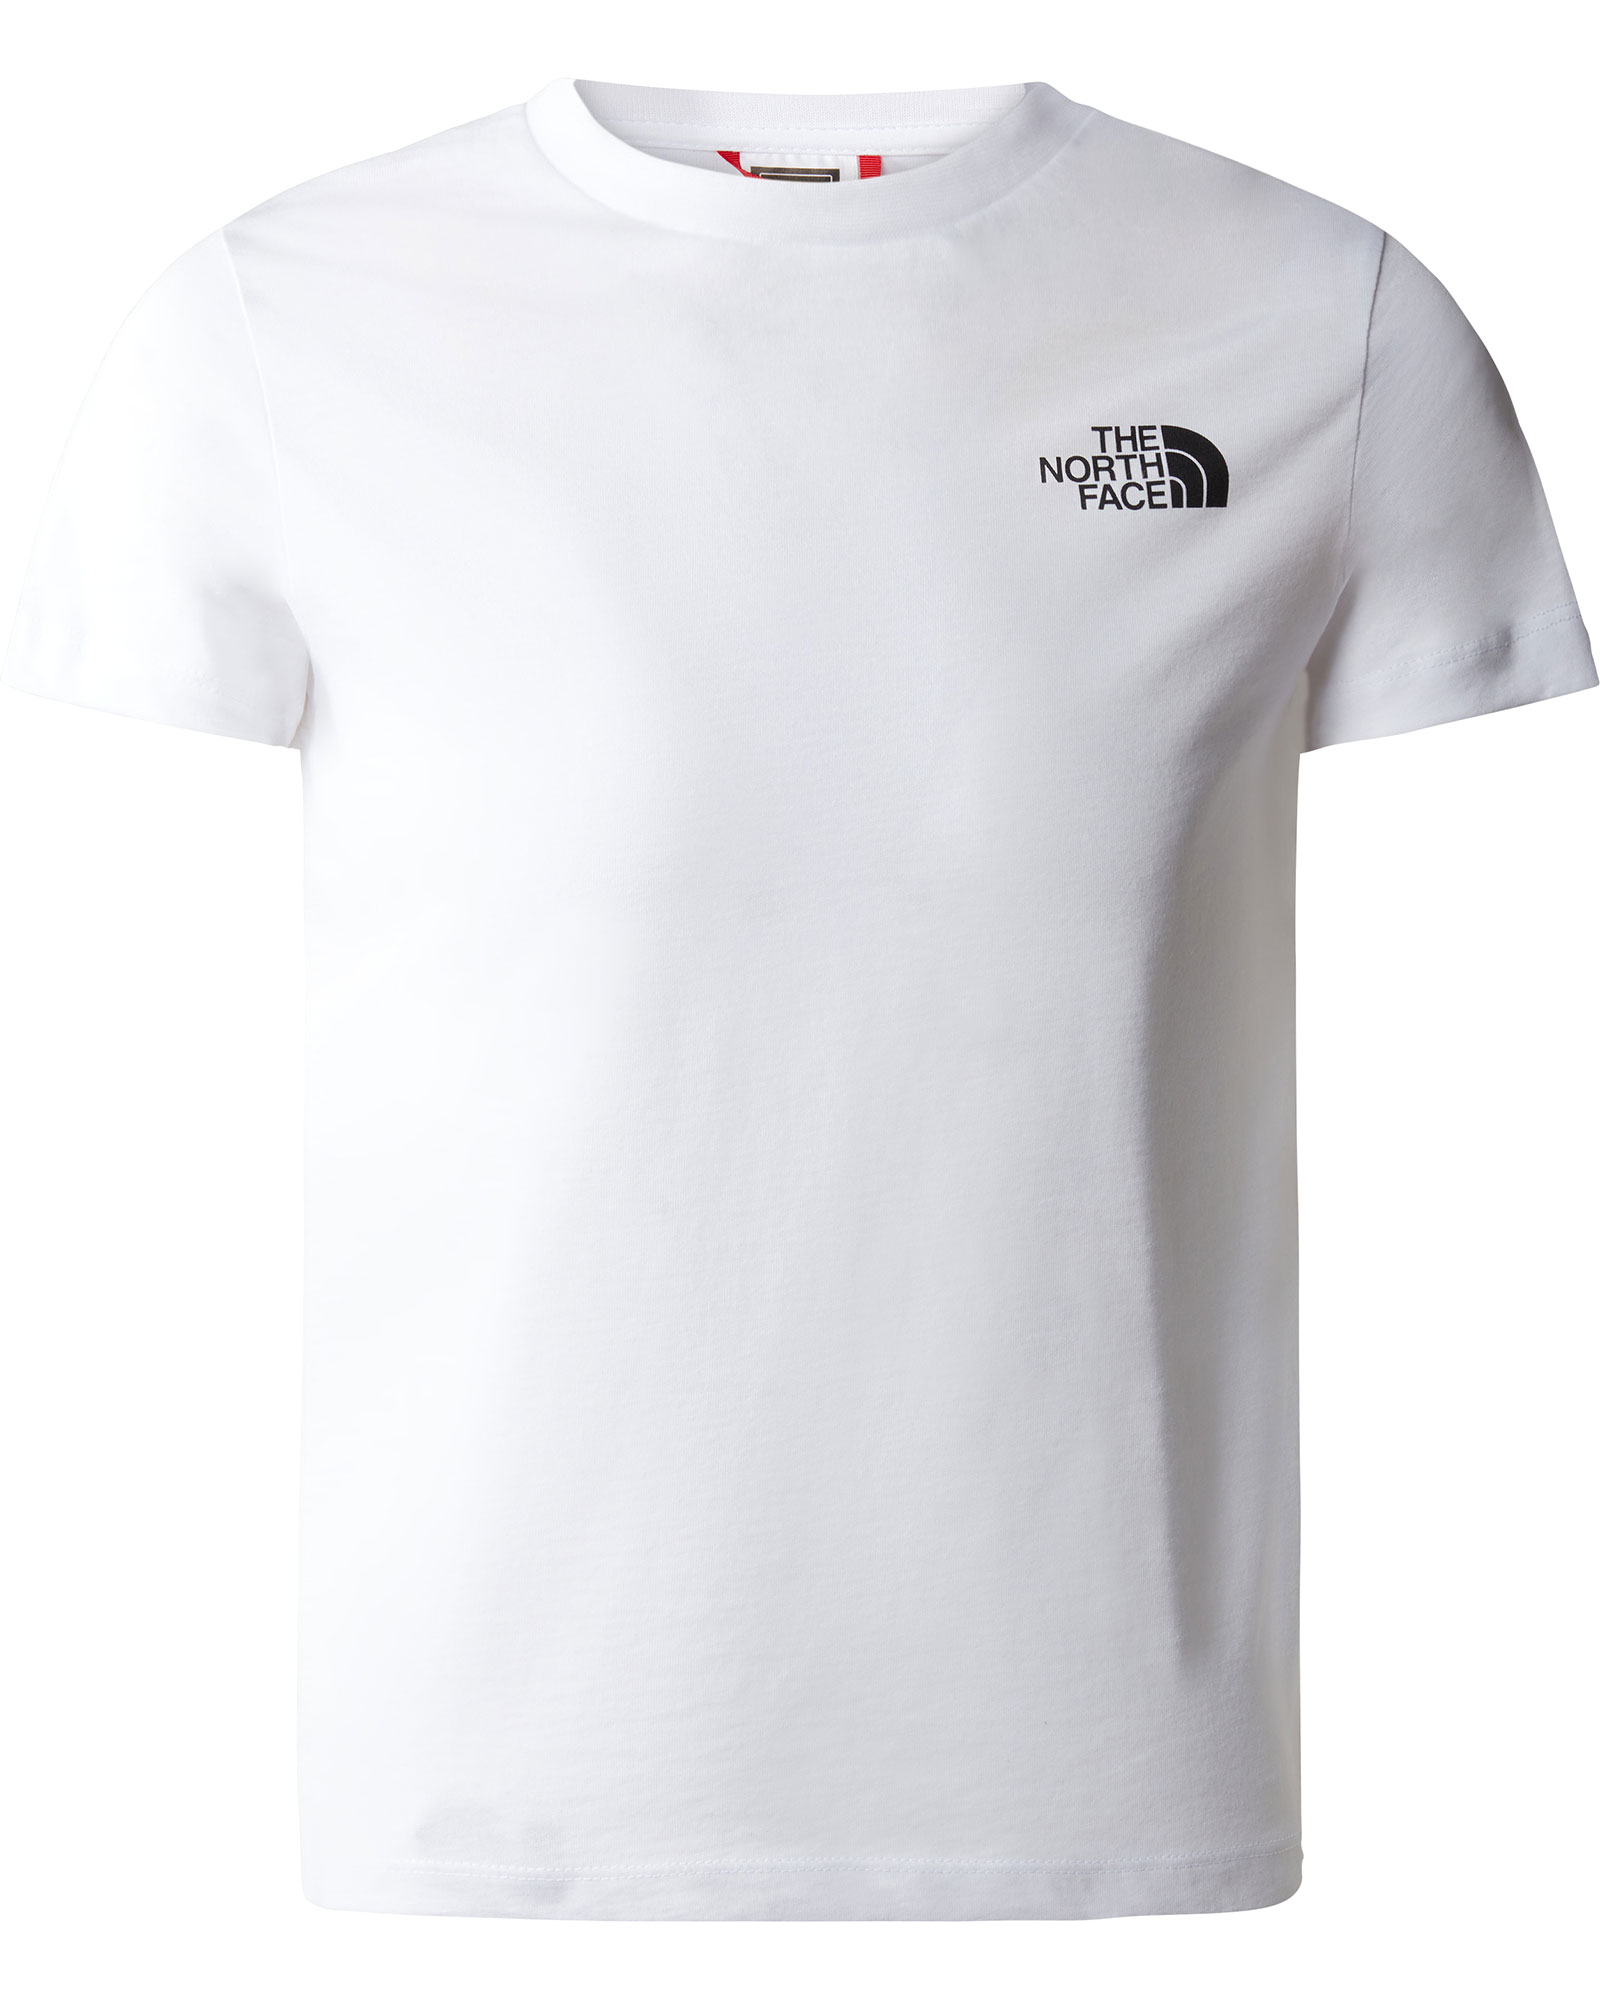 The North Face Youth Simple Dome T-Shirt